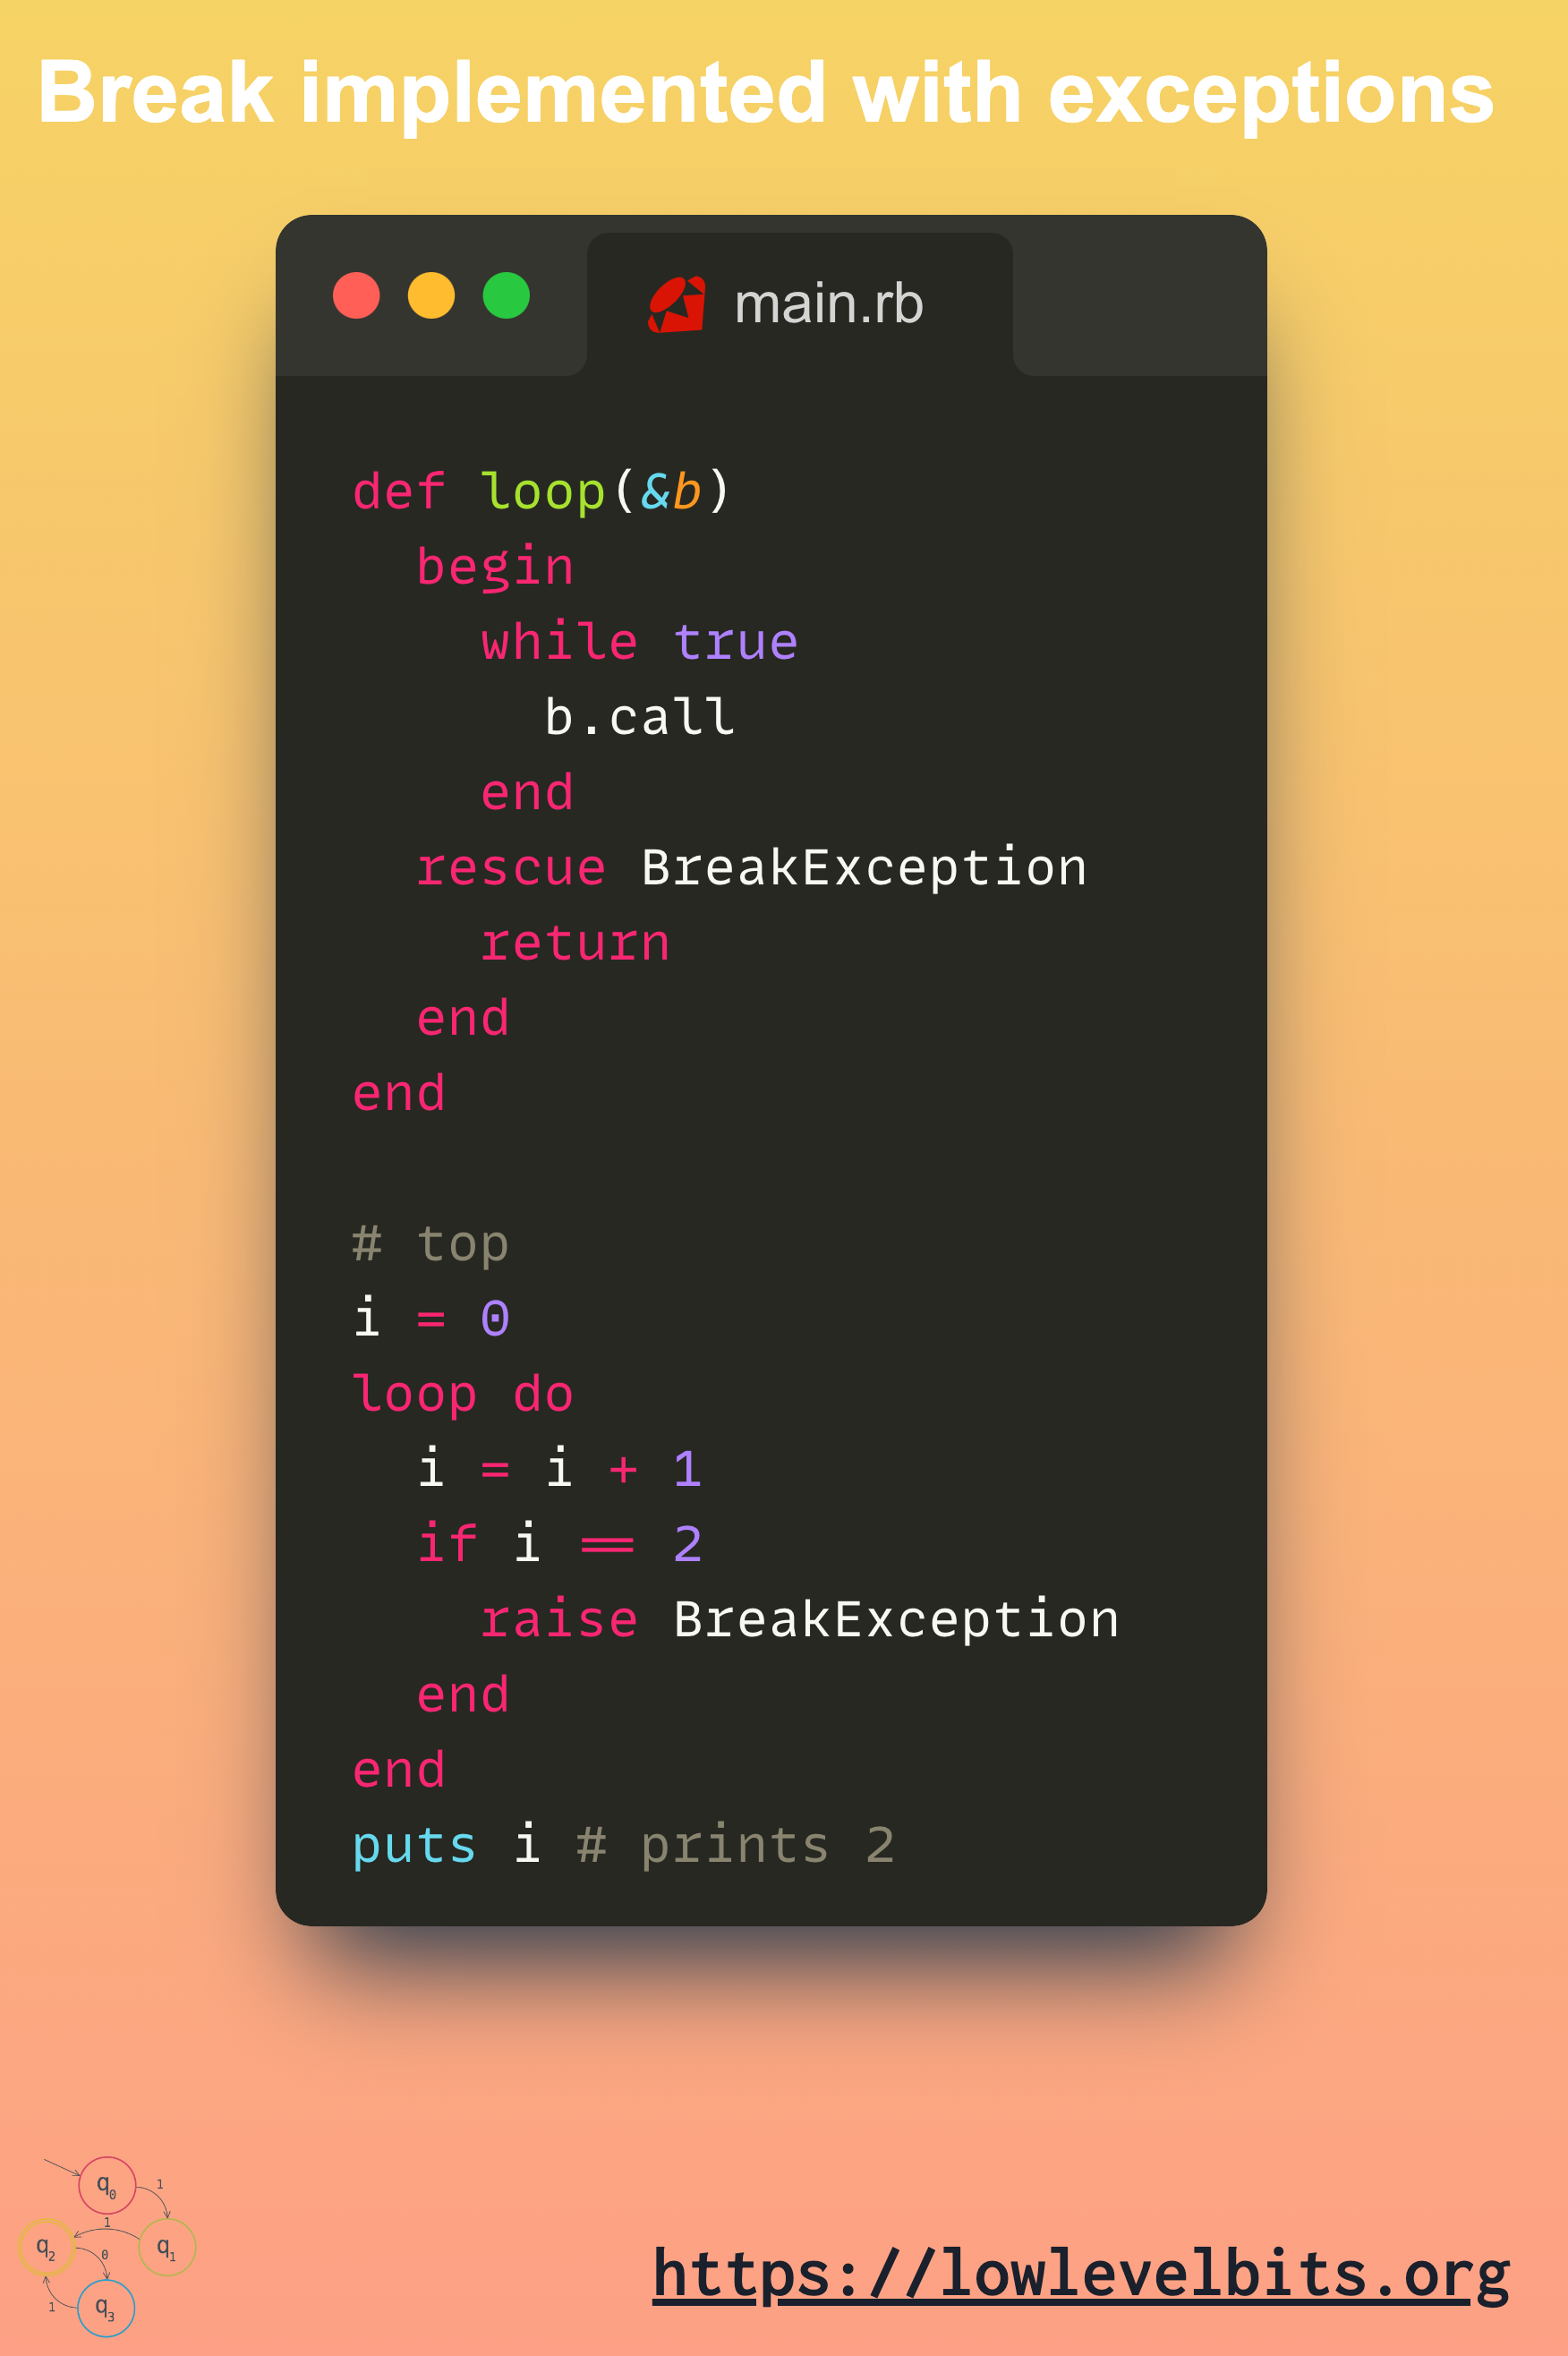 Break implemented using exception